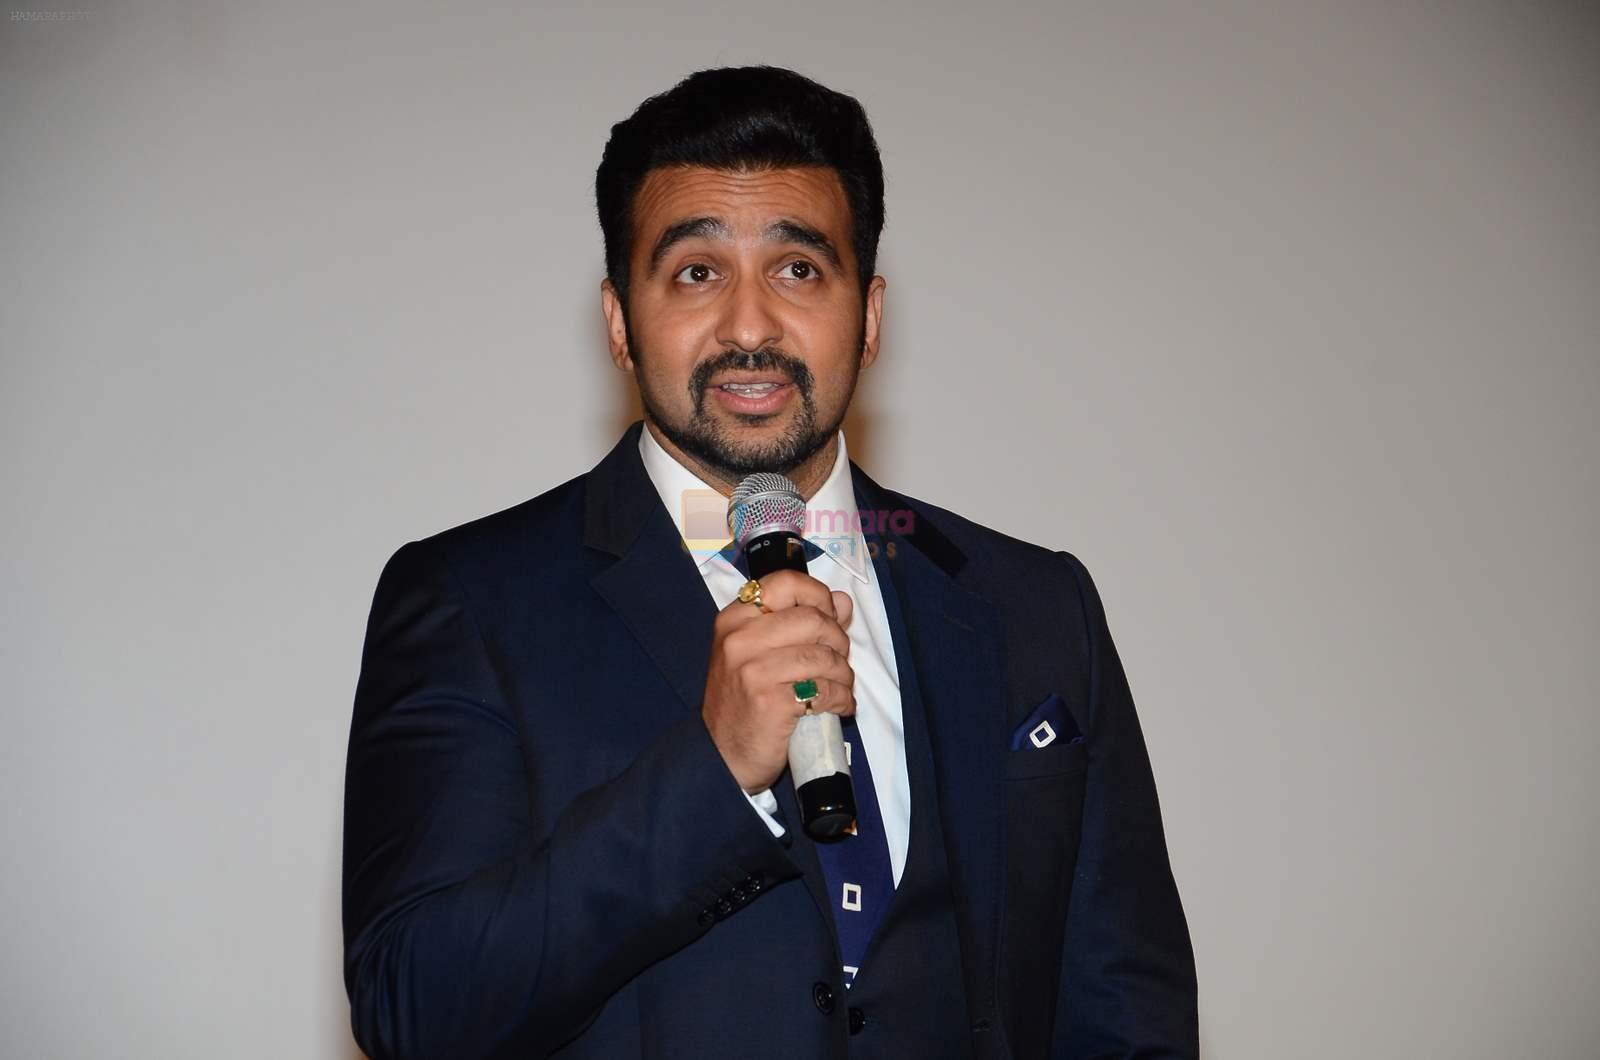 Raj Kundra at Shilpa's new home shop venture in PVR on 5th March 2015